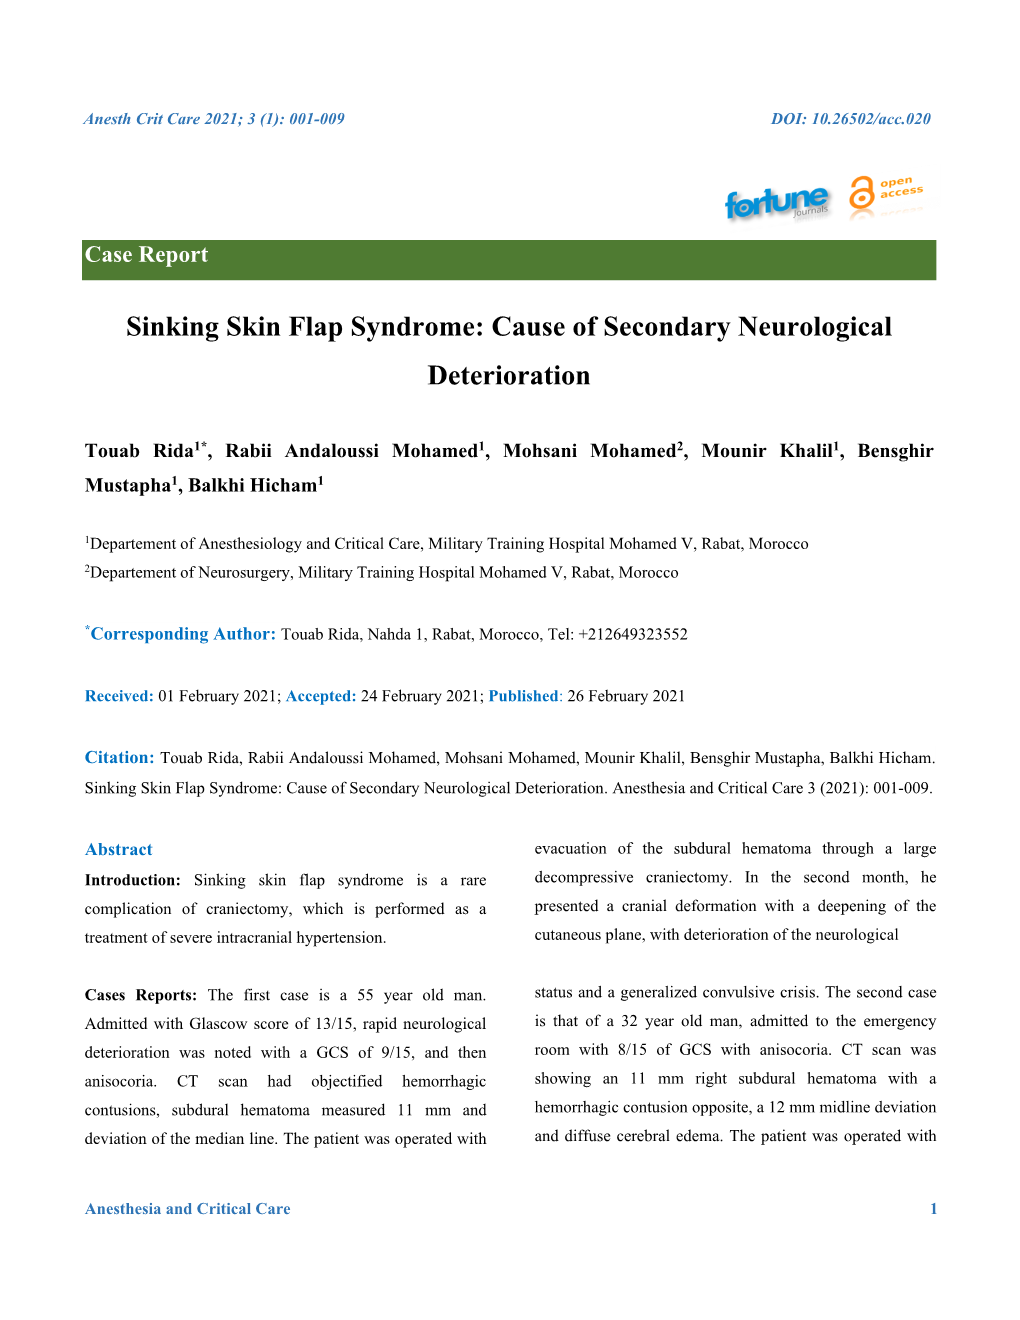 Sinking Skin Flap Syndrome: Cause of Secondary Neurological Deterioration